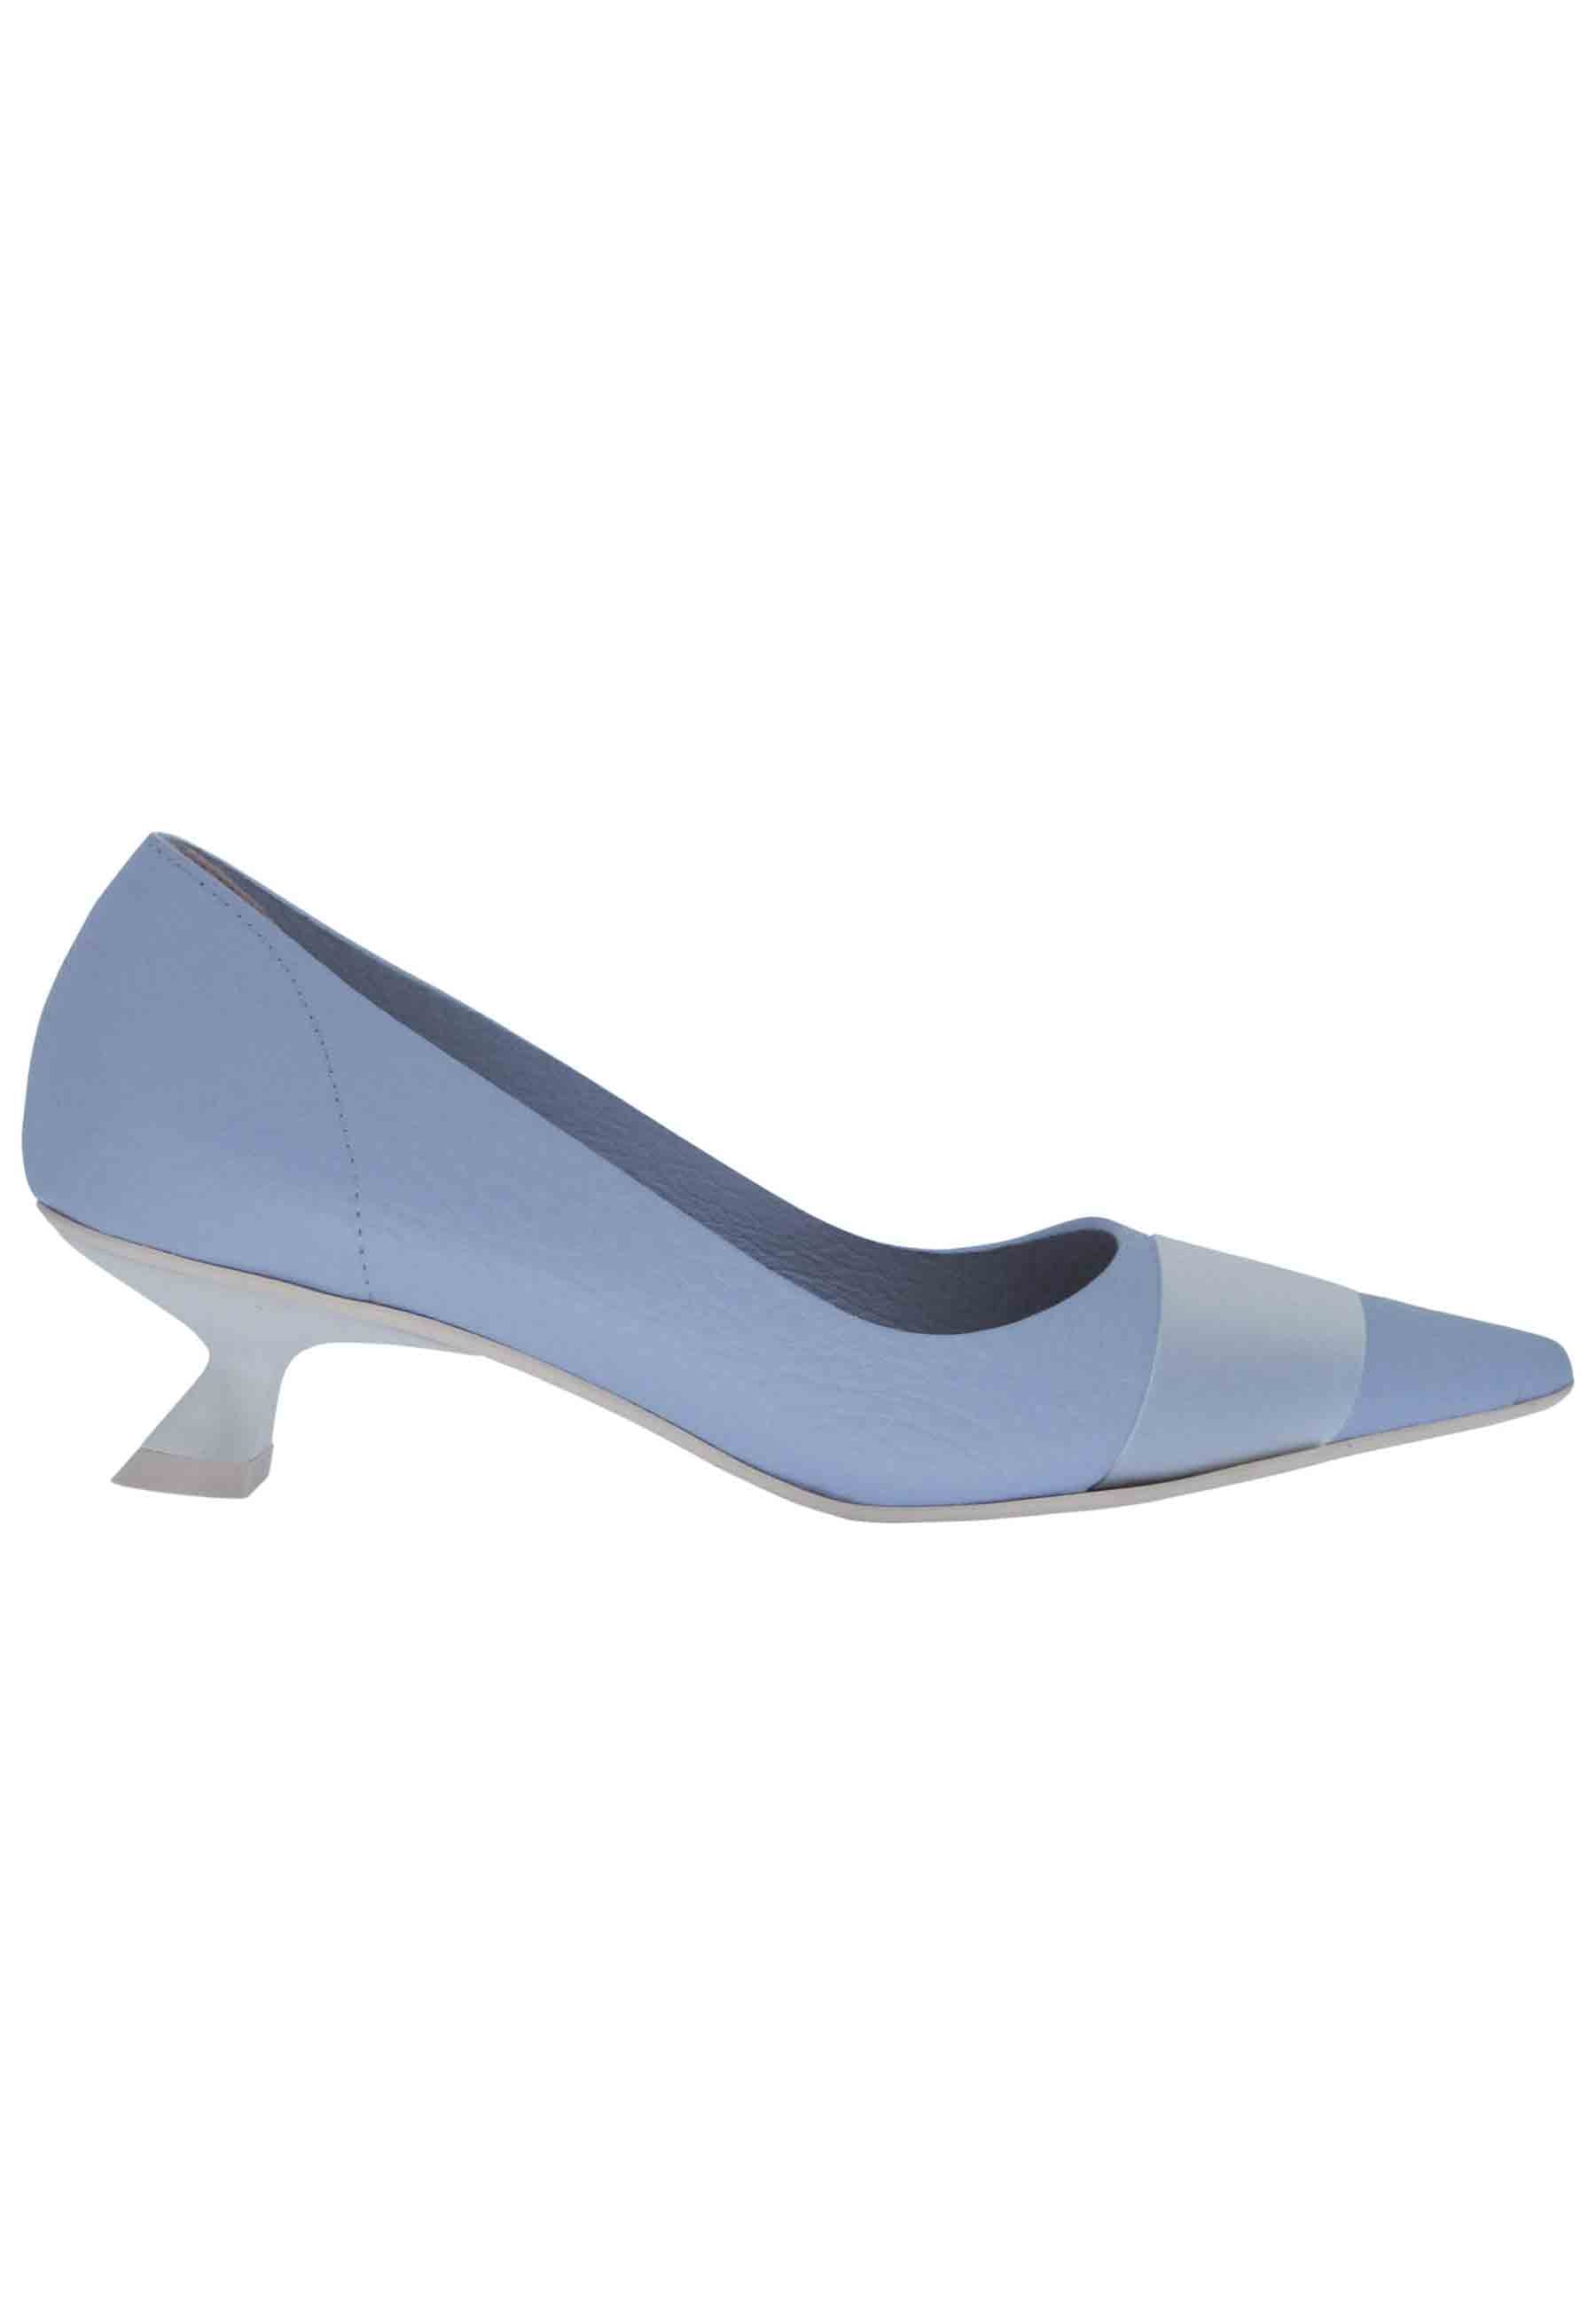 Women's decollete in wisteria leather with white satin heel